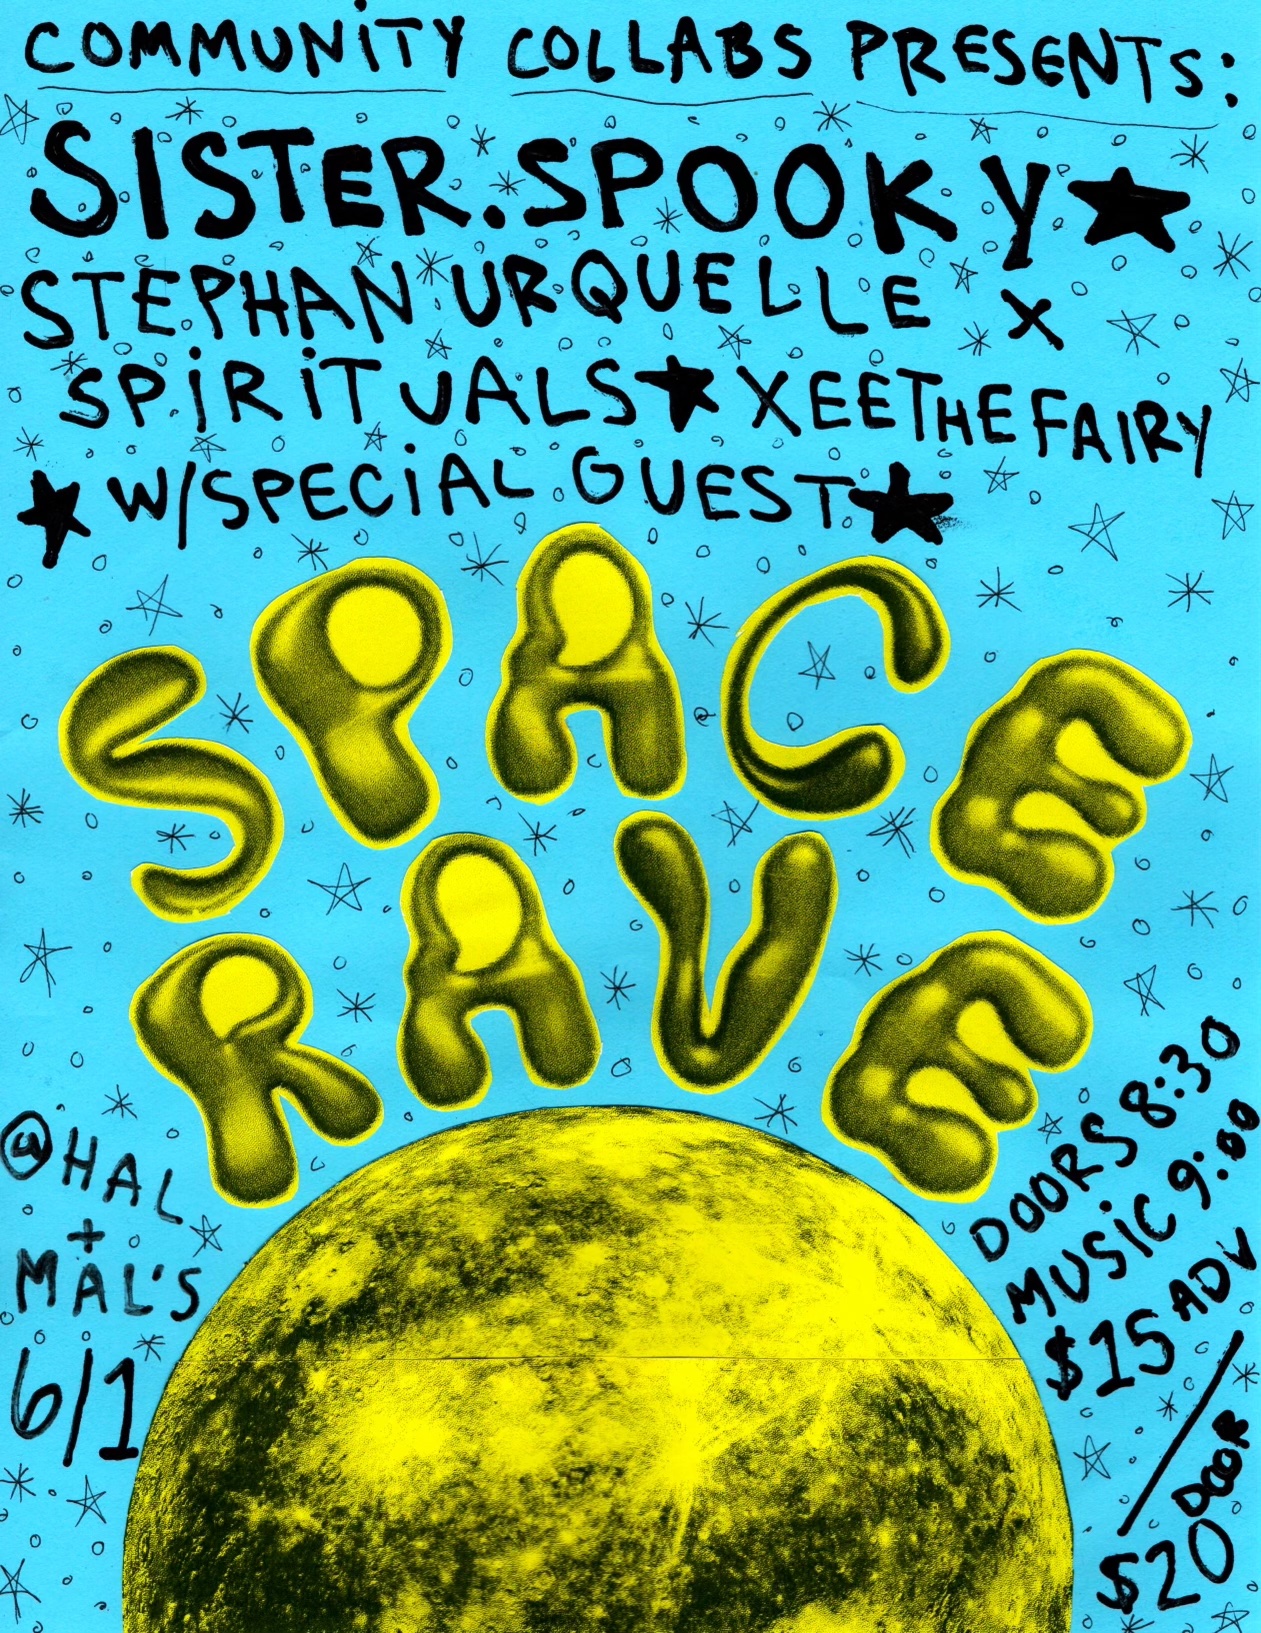 Space Rave at Hal&Mal’s